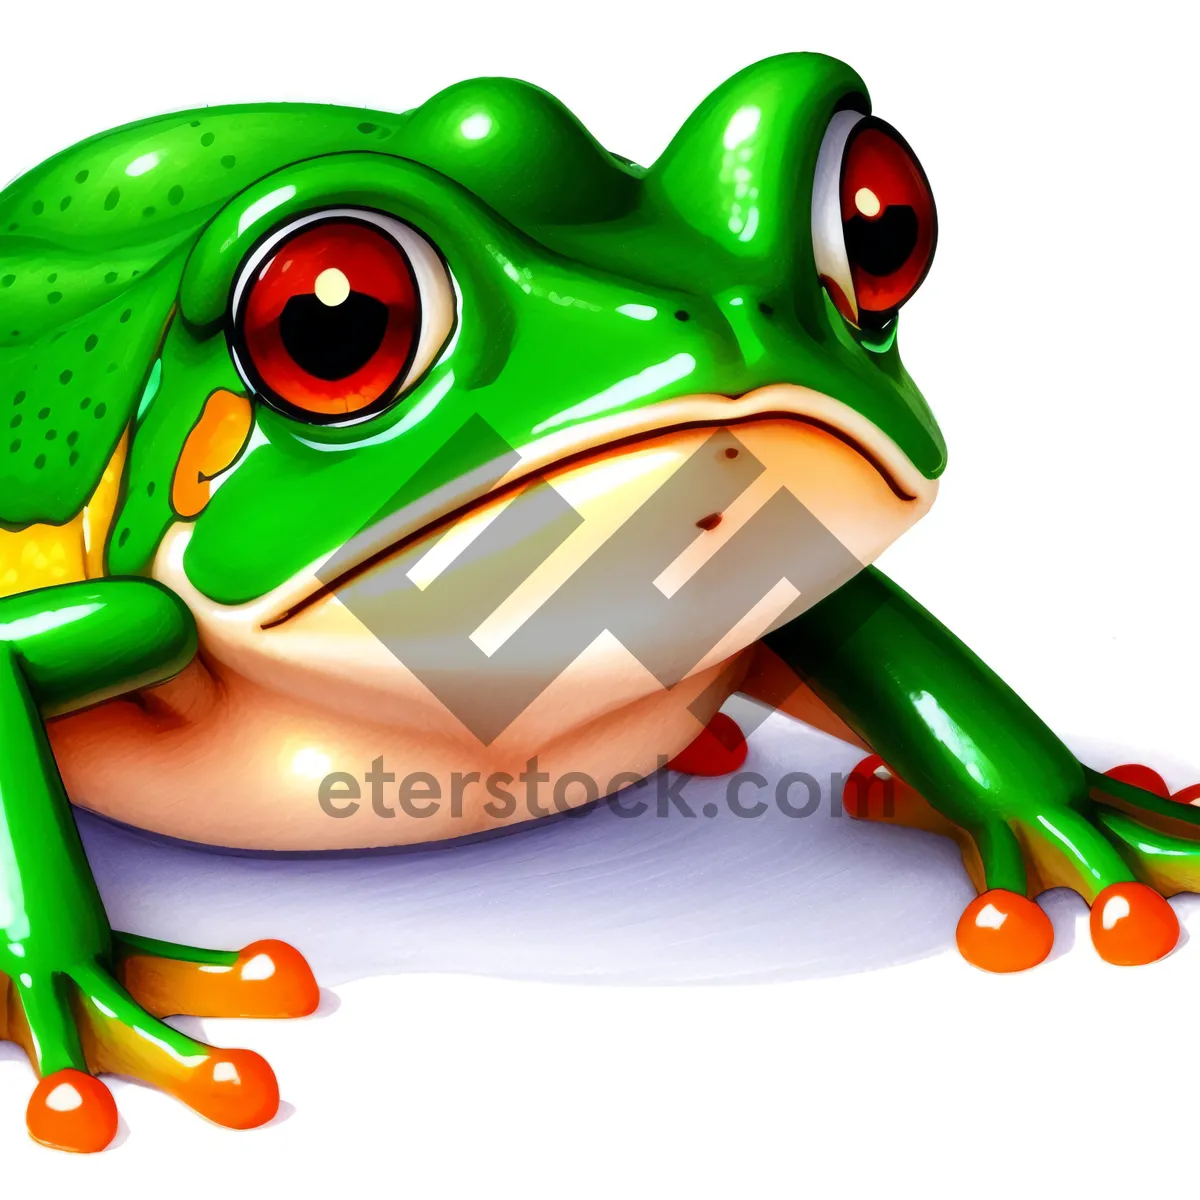 Picture of Bacterial Frog Cartoon - Cute and Fun 3D Character